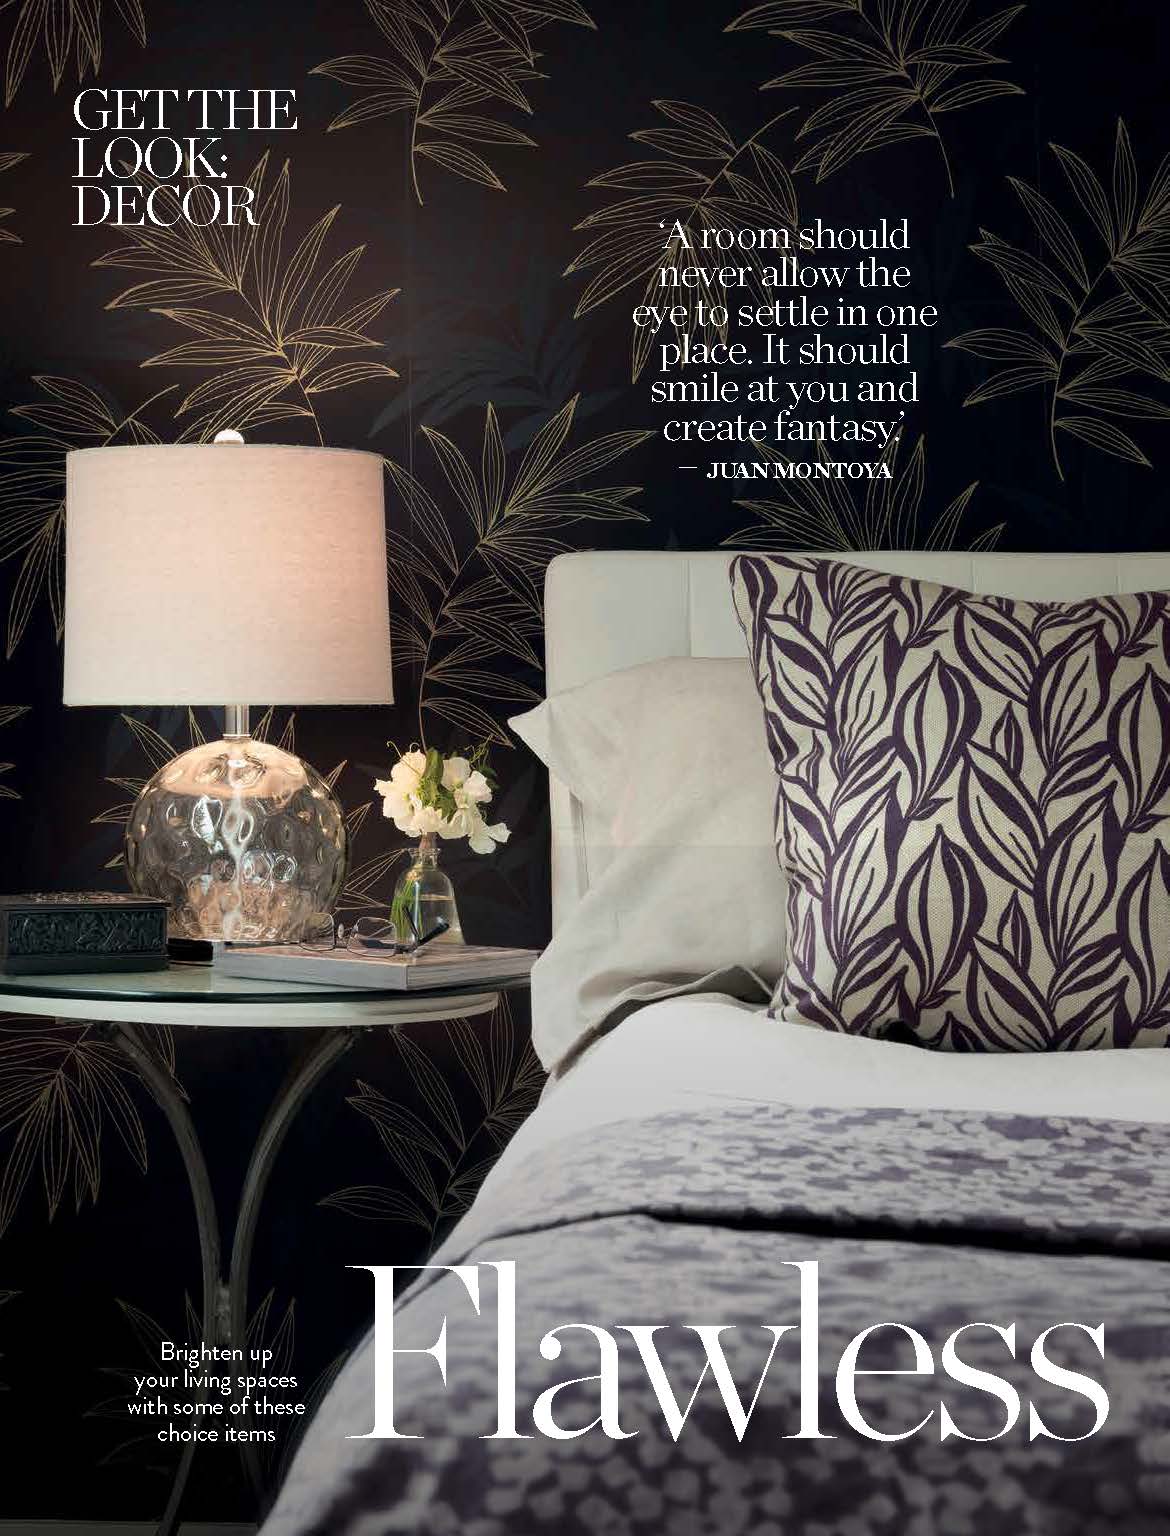 South African Decor article in Club magazine features j banks collection tile pattern Mod Palm